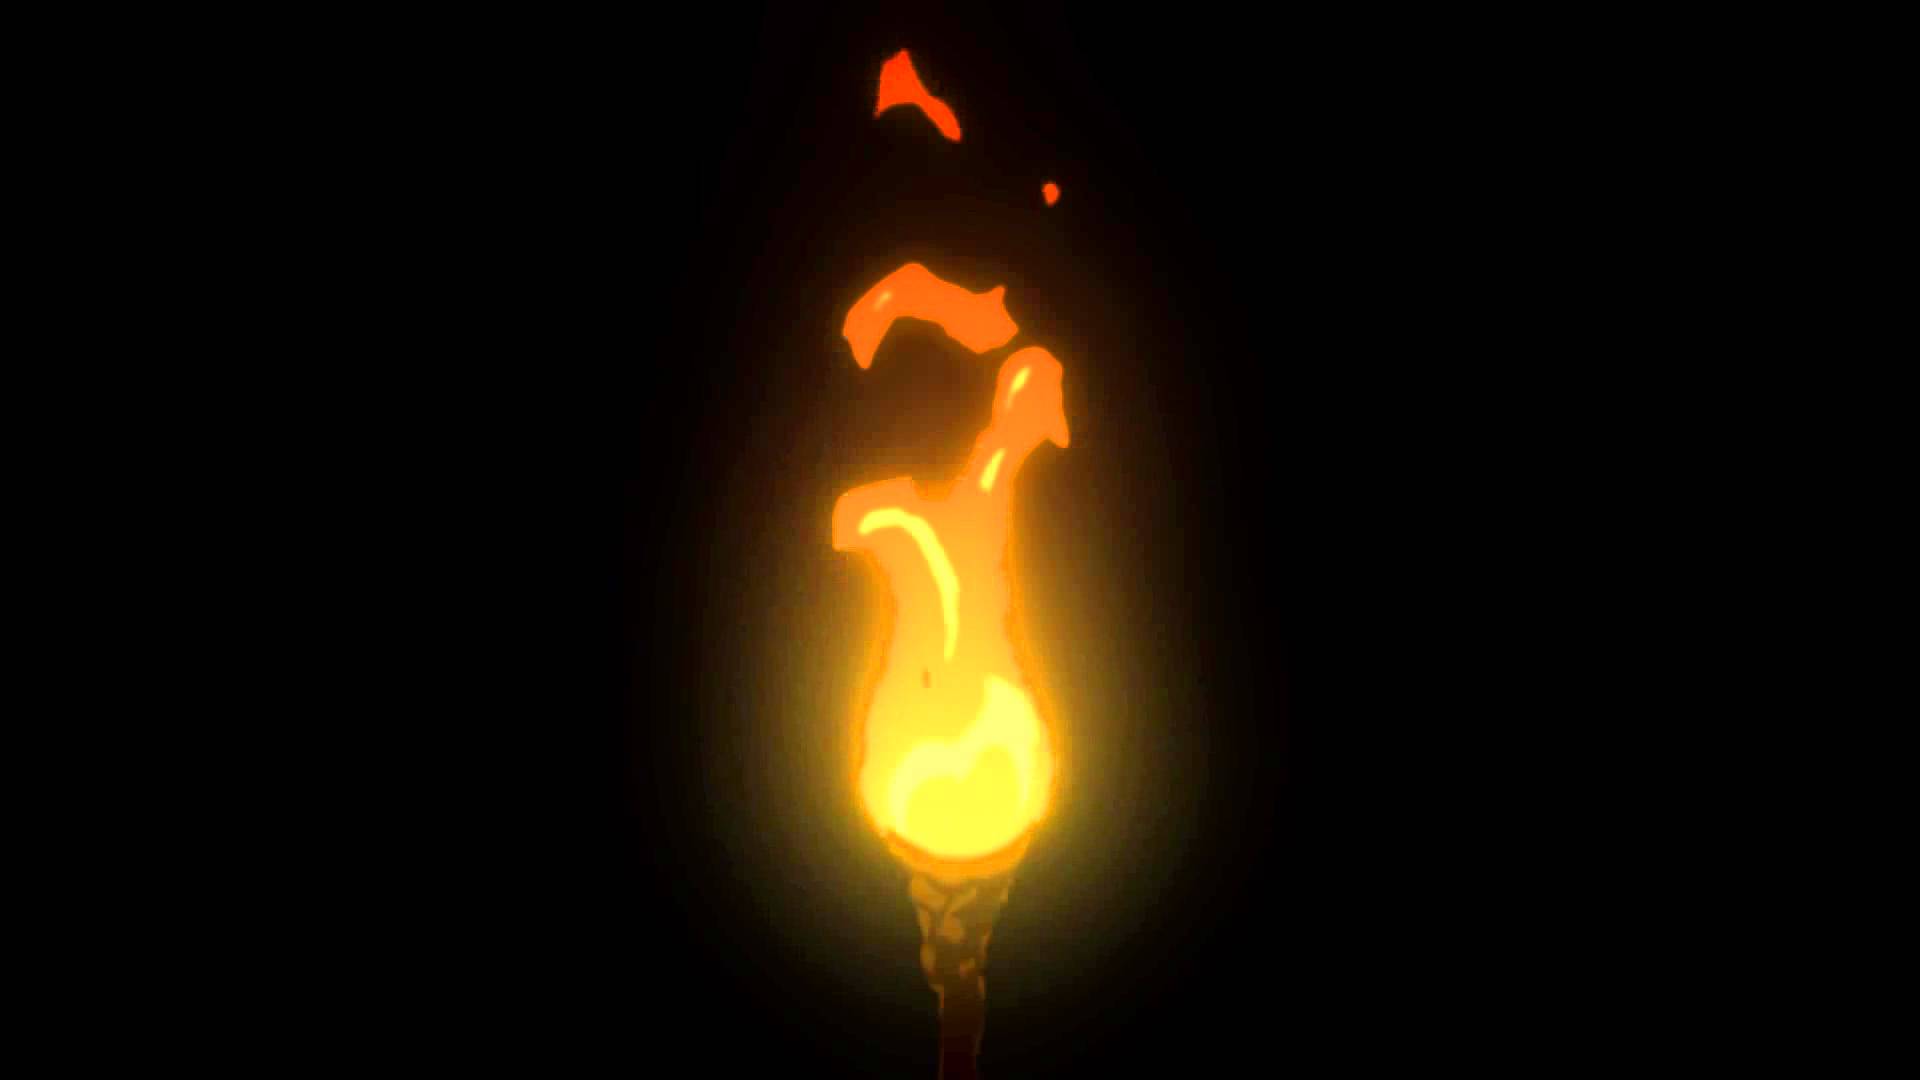 Flame Animation - 2D Effect - YouTube